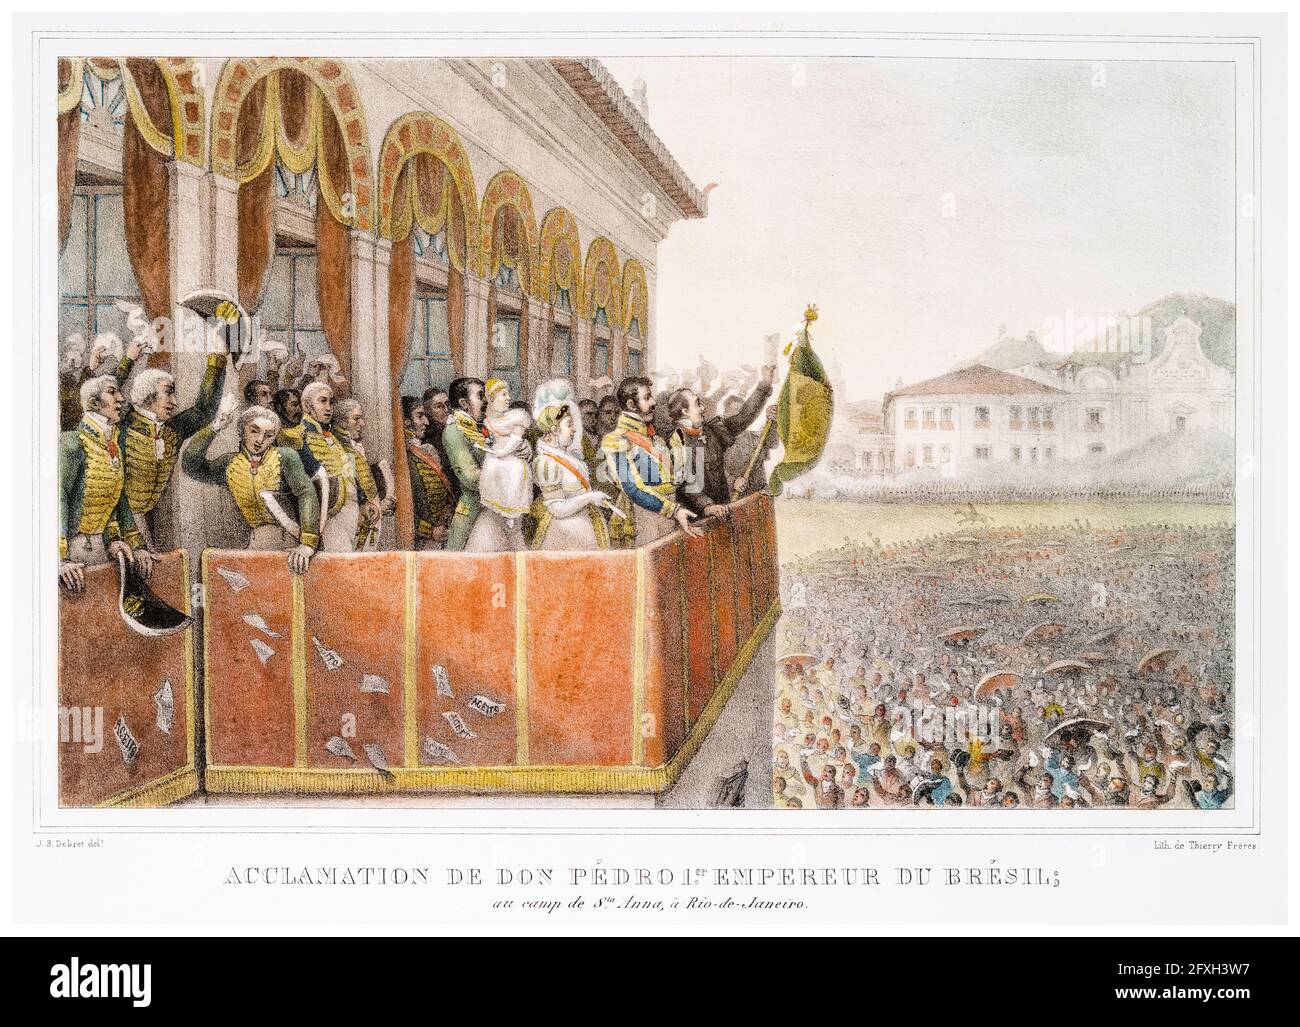 Crowds cheering Dom Pedro I (1798-1834) Emperor of Brazil and his first wife Maria Leopoldina (1797-1826), Empress consort of Brazil at the Santa Anna, camp in Rio de Janeiro, lithographic print by Jean Baptiste Debret, 1834-1839 Stock Photo